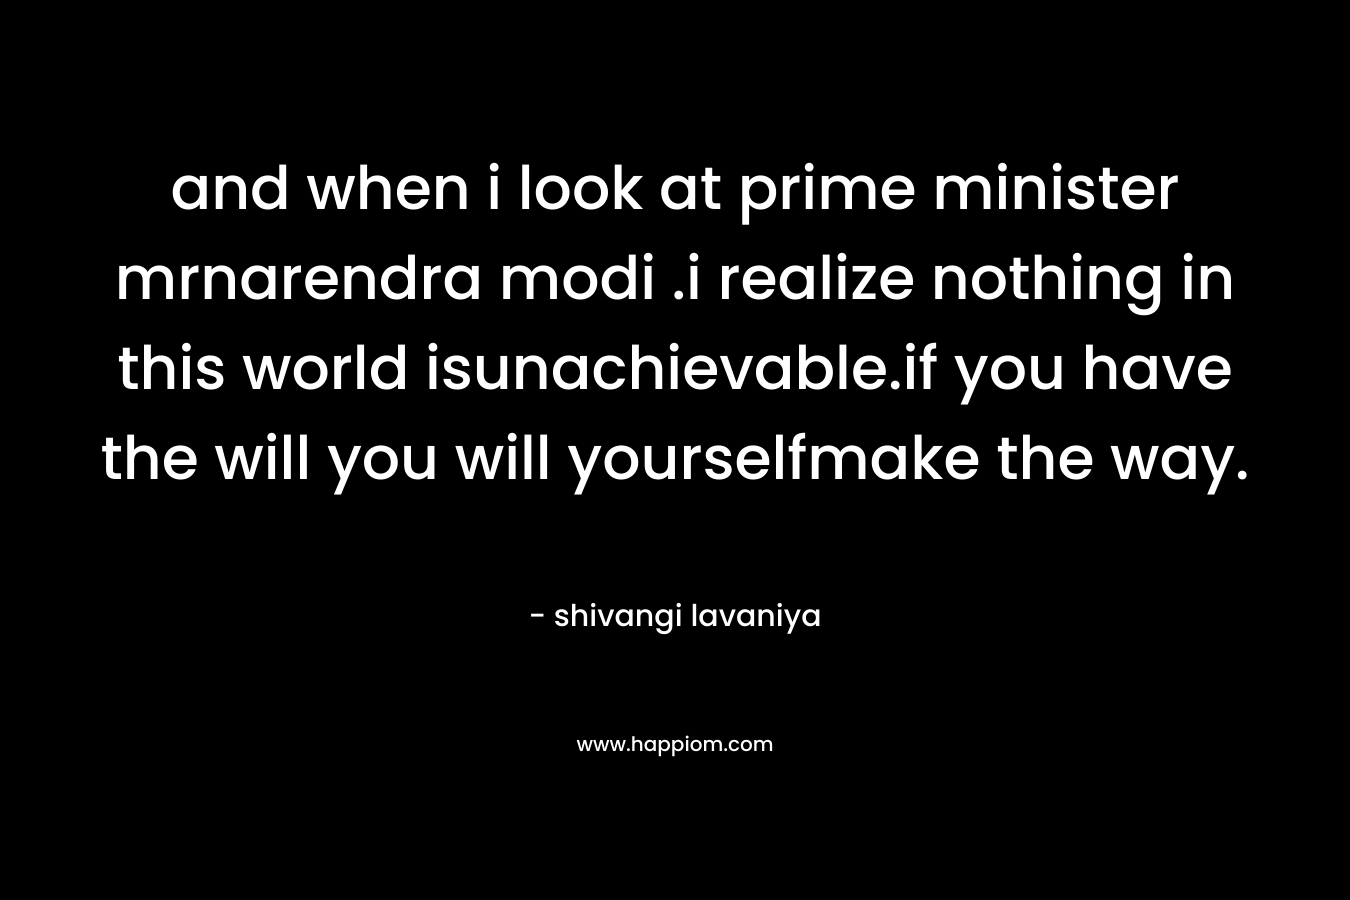 and when i look at prime minister mrnarendra modi .i realize nothing in this world isunachievable.if you have the will you will yourselfmake the way.